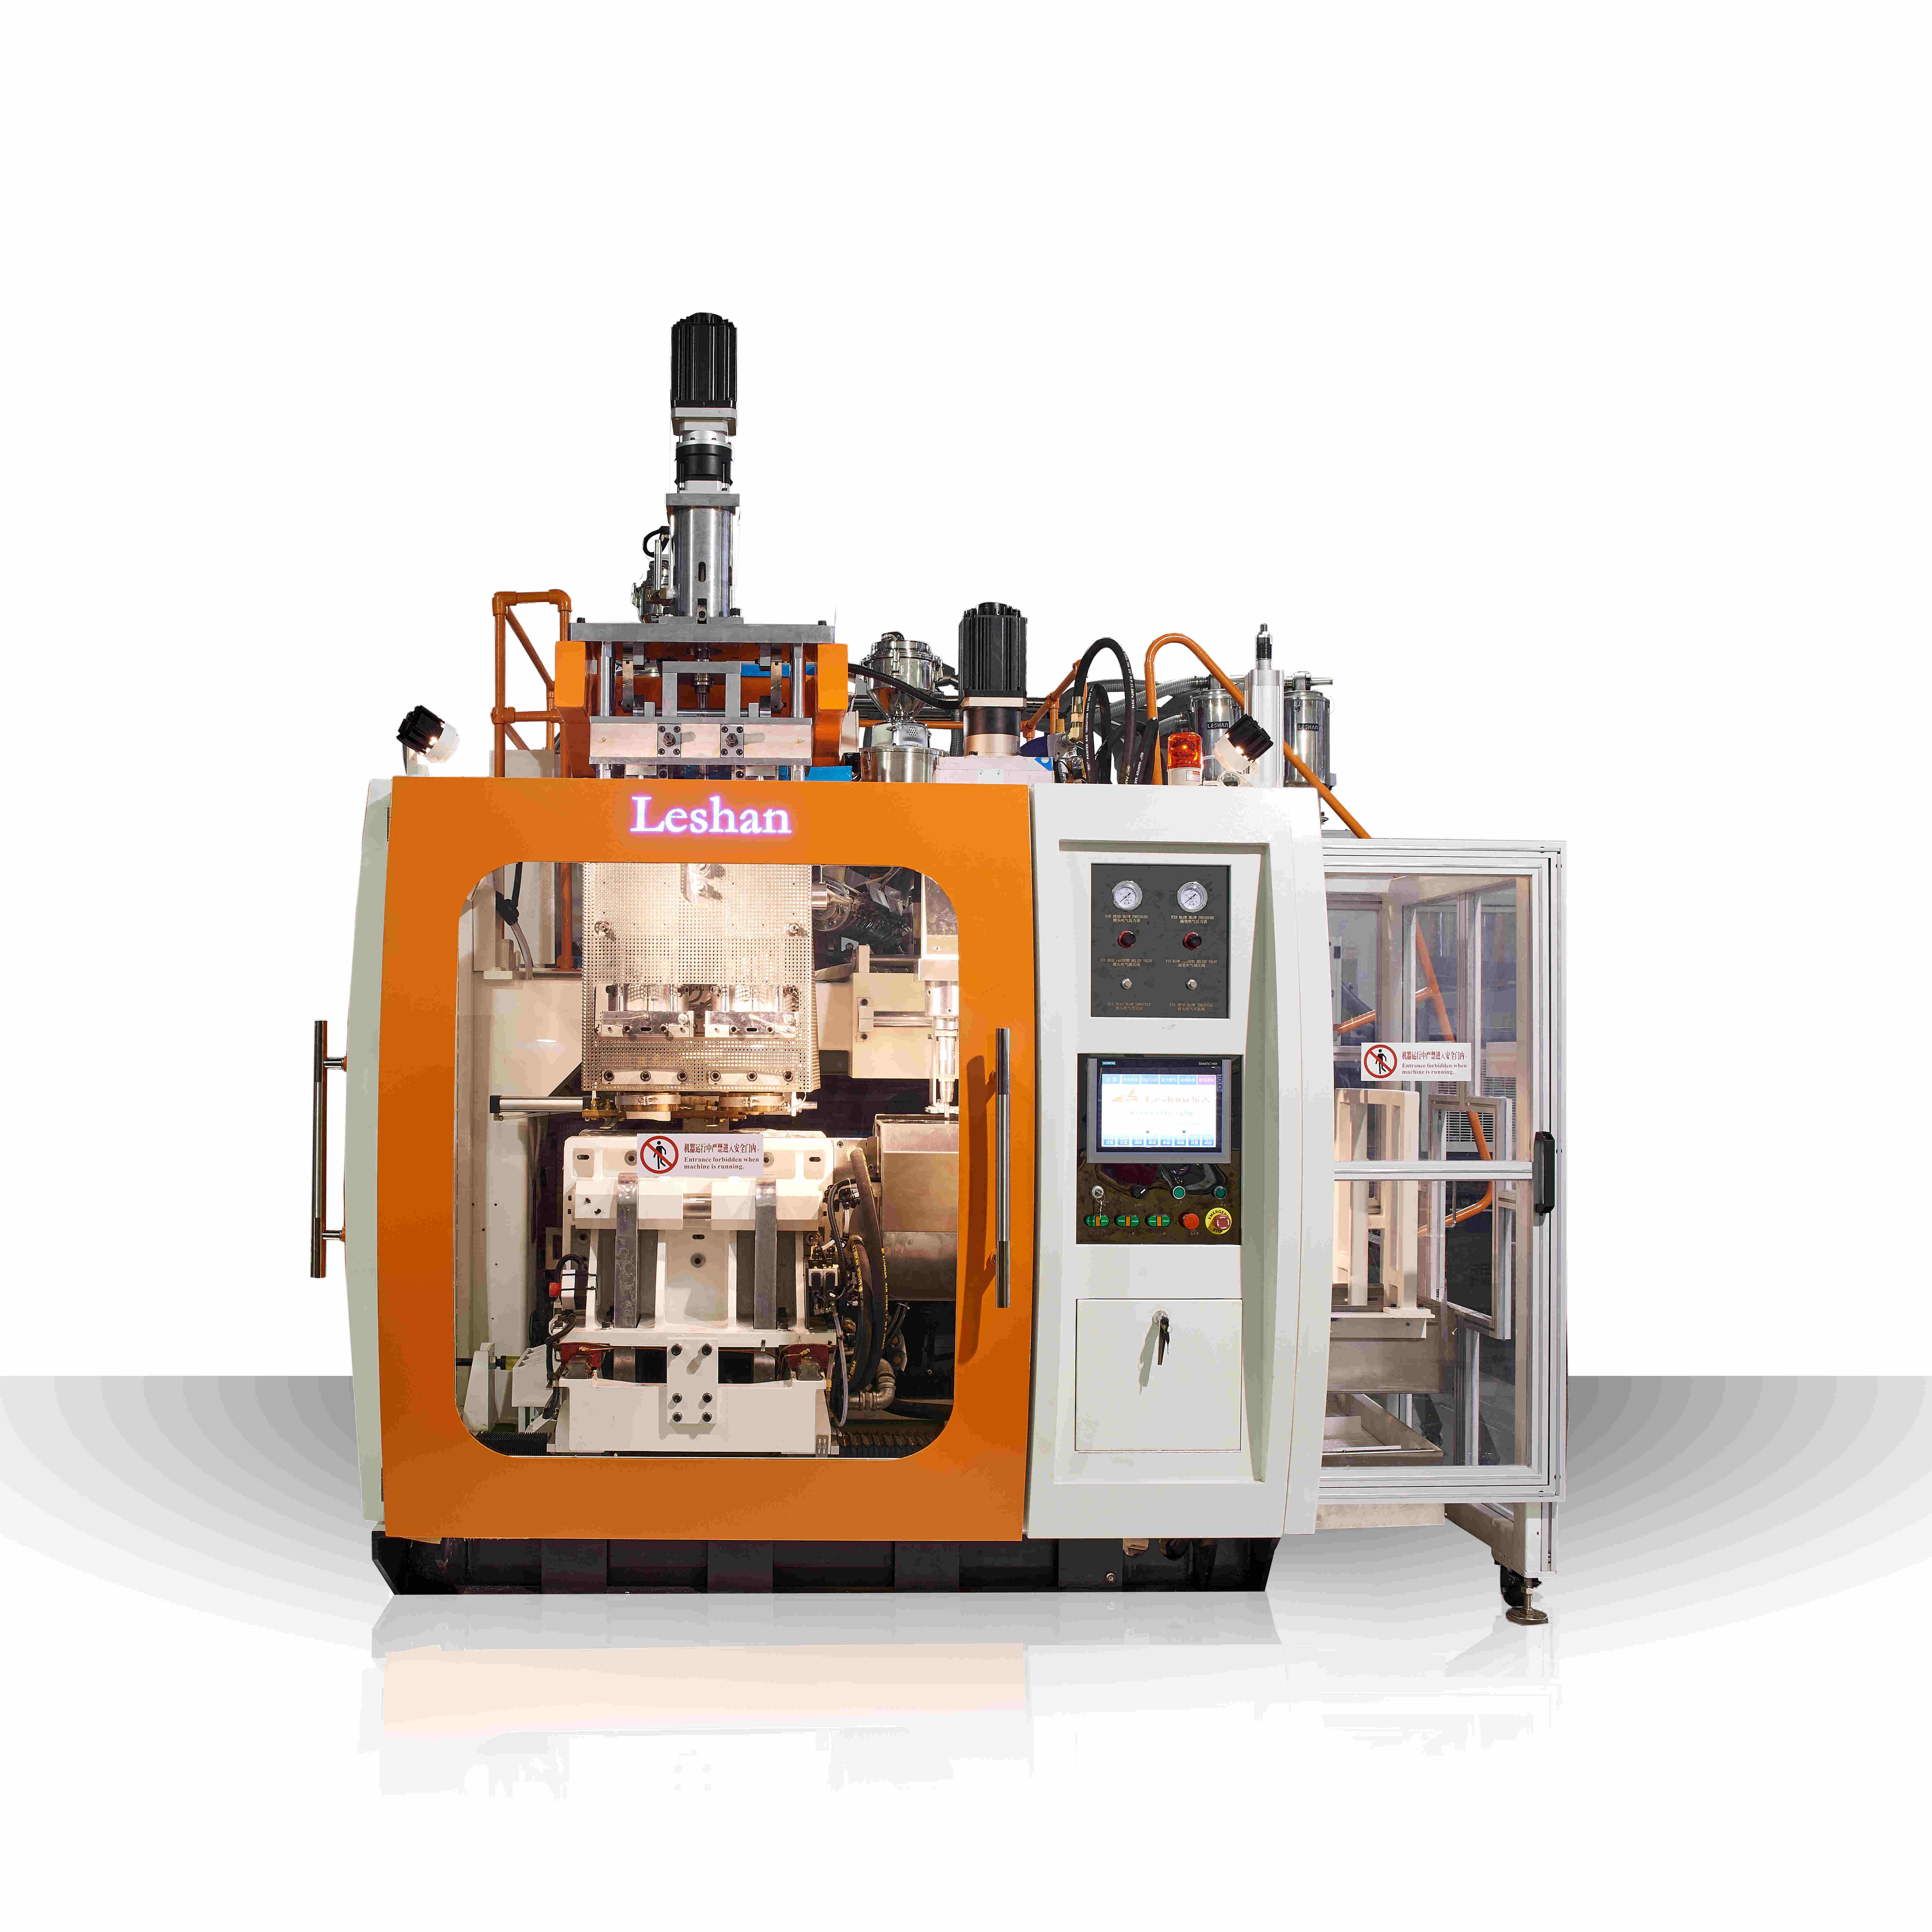 What are the dimensions and weight of the extrusion blow molding making machine?